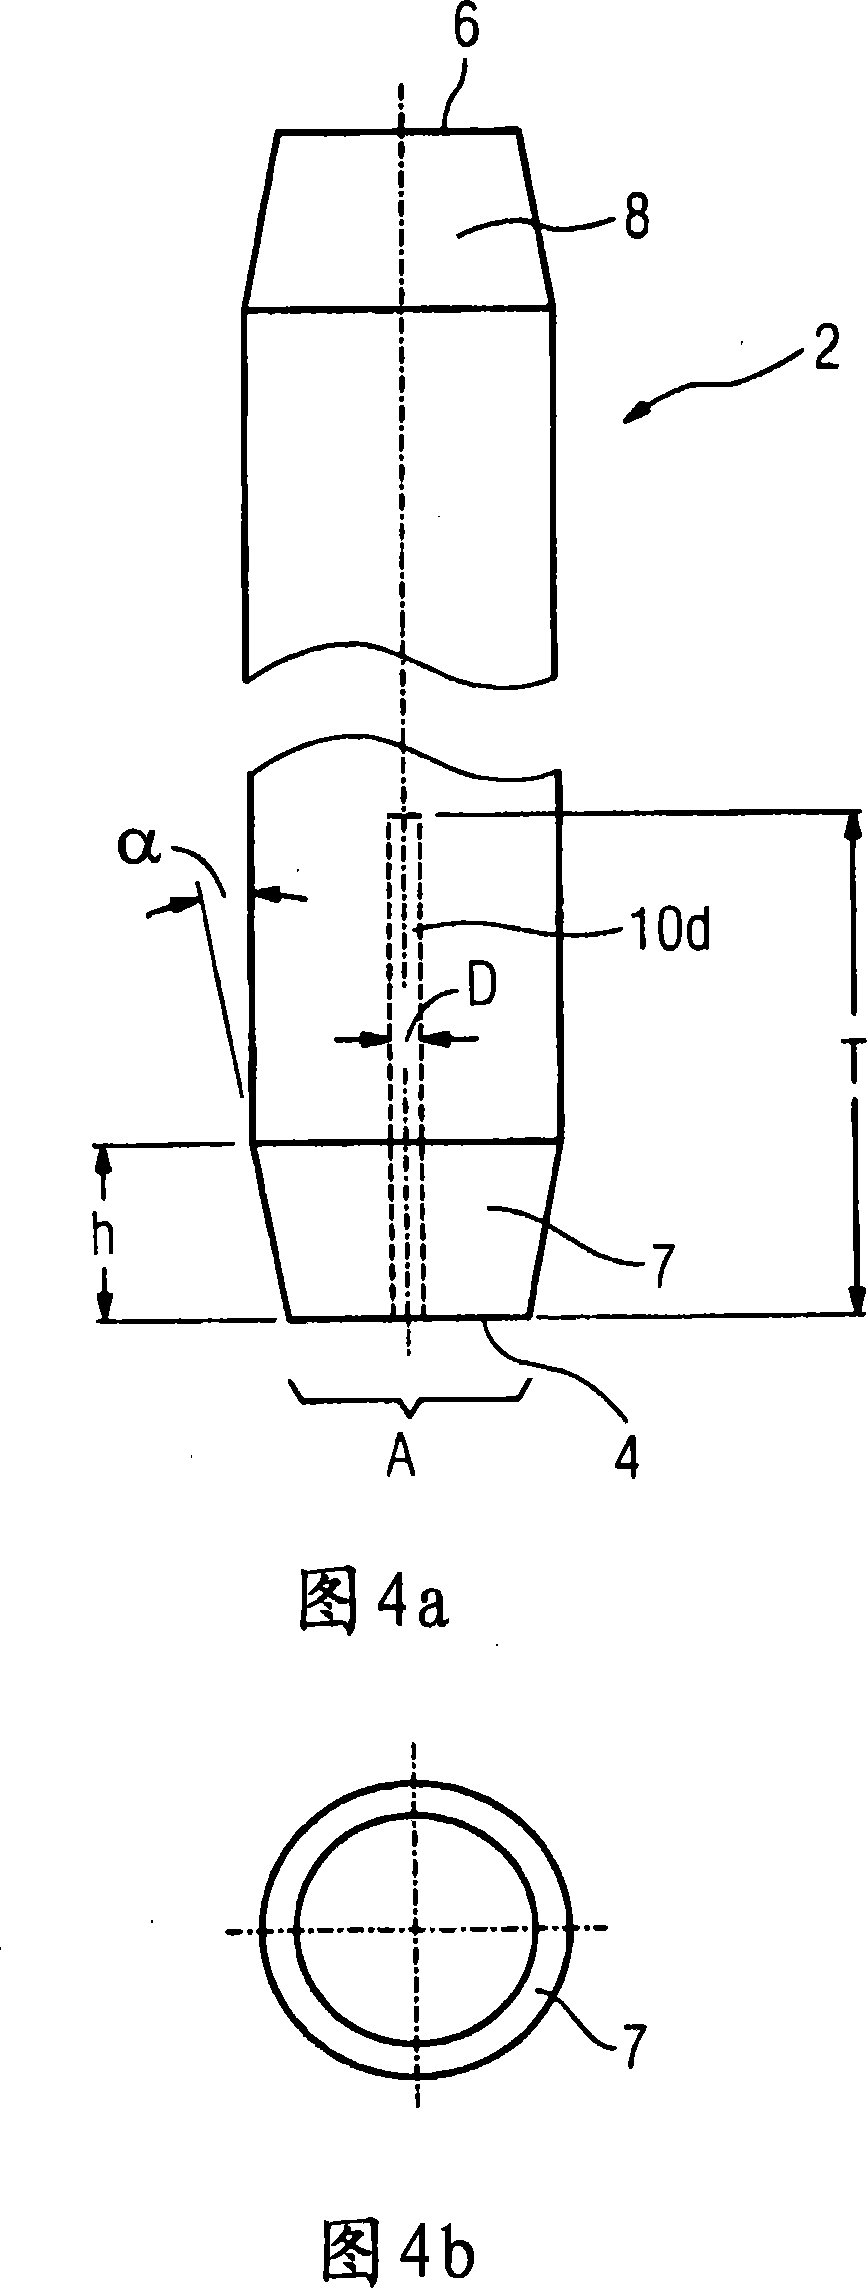 Control rod for a pressurized-water nuclear reactor